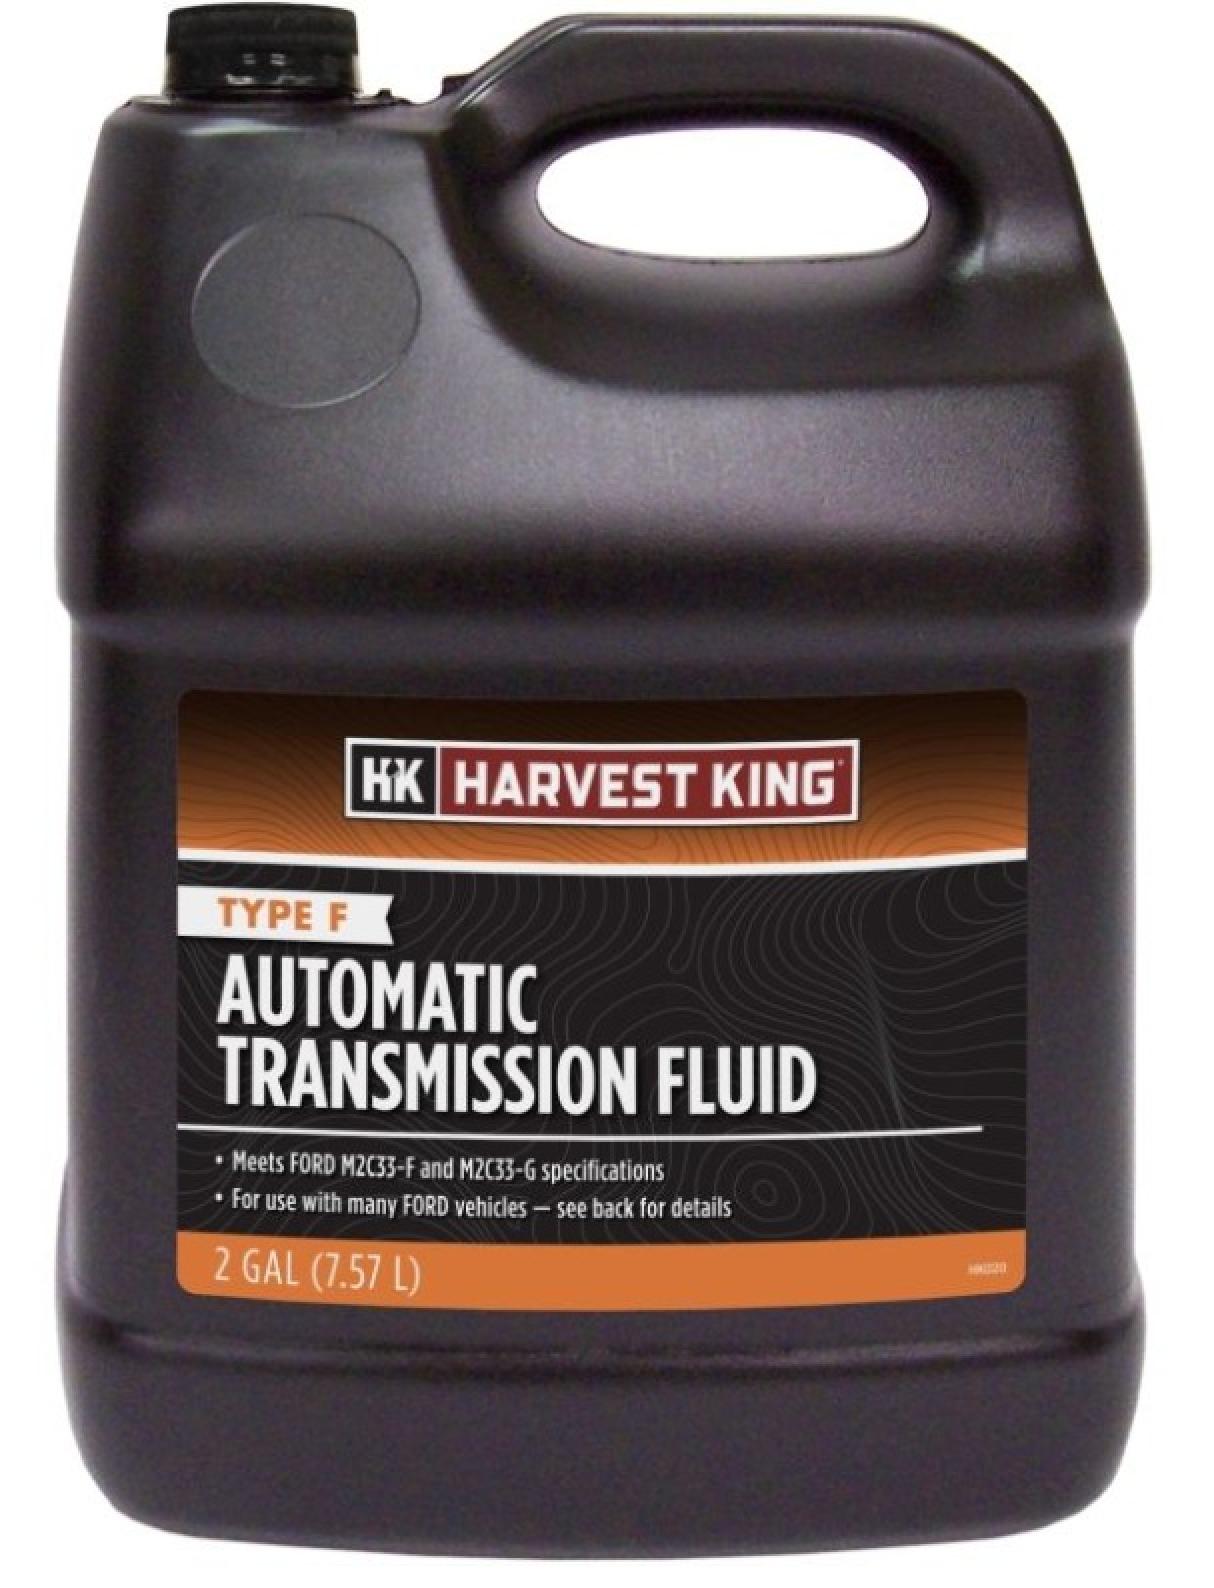 Harvest King Ford Type F Automatic Transmission Fluid